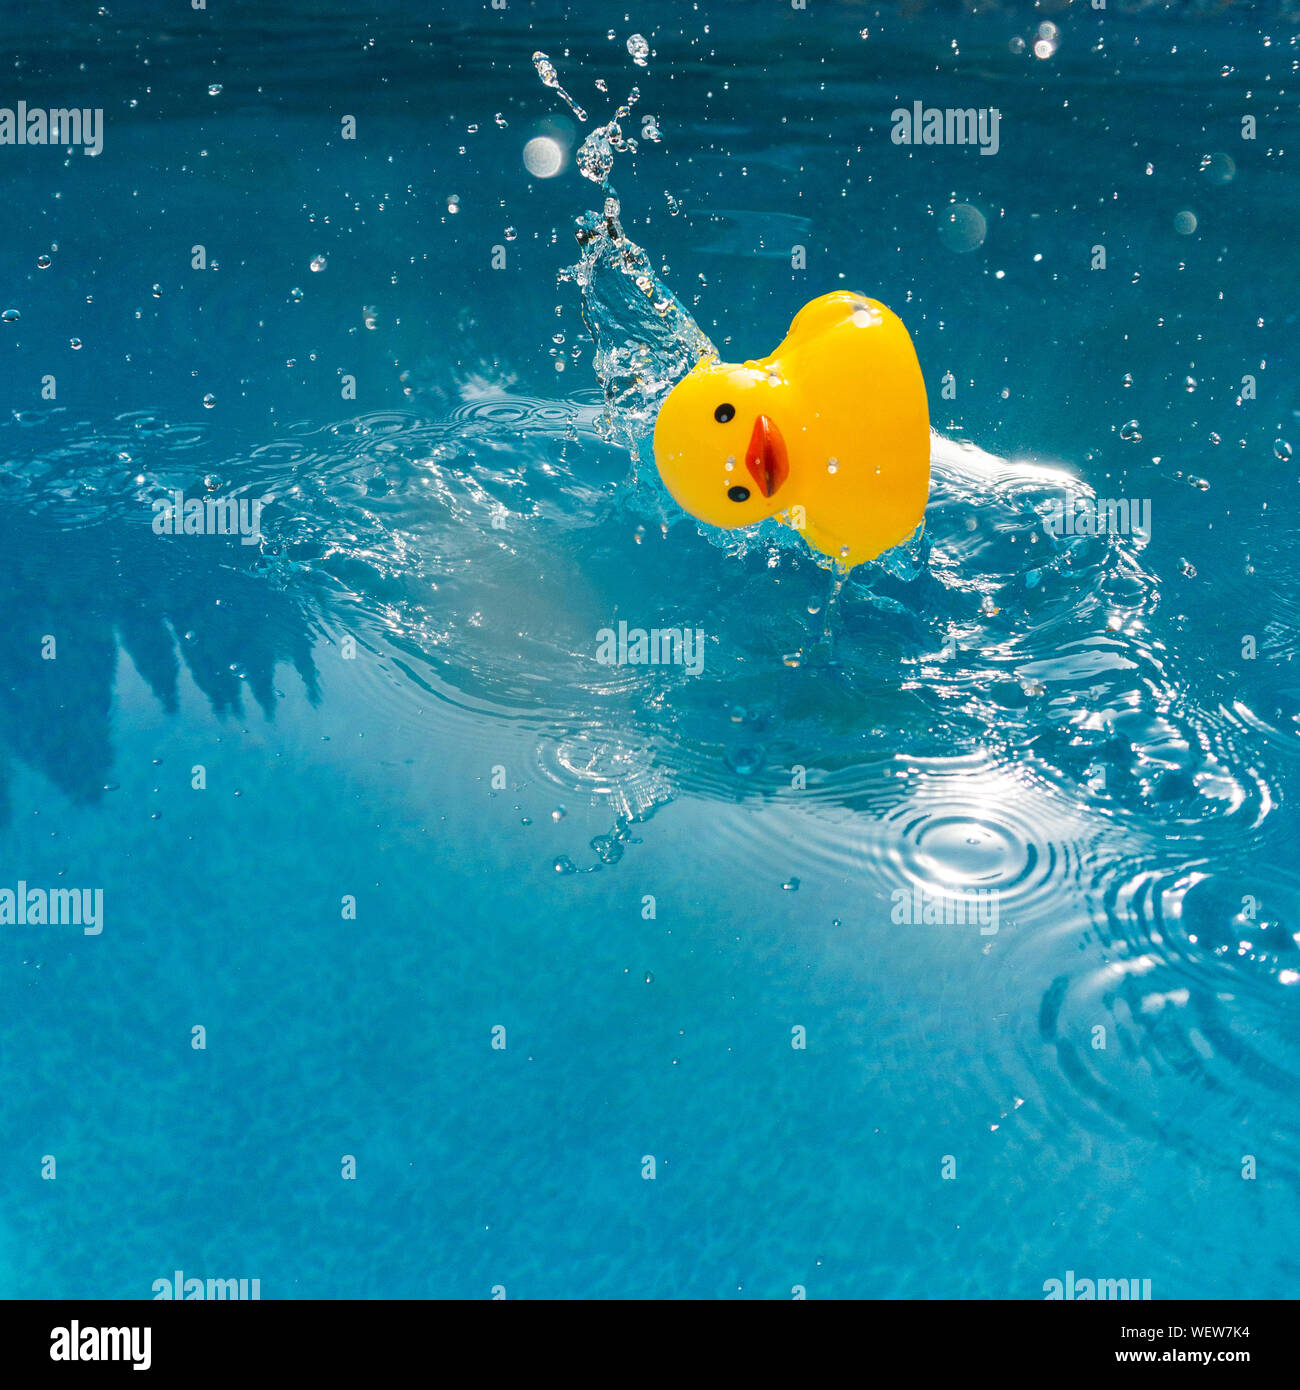 Yellow rubber duck falling sideways into water with a splash Stock Photo